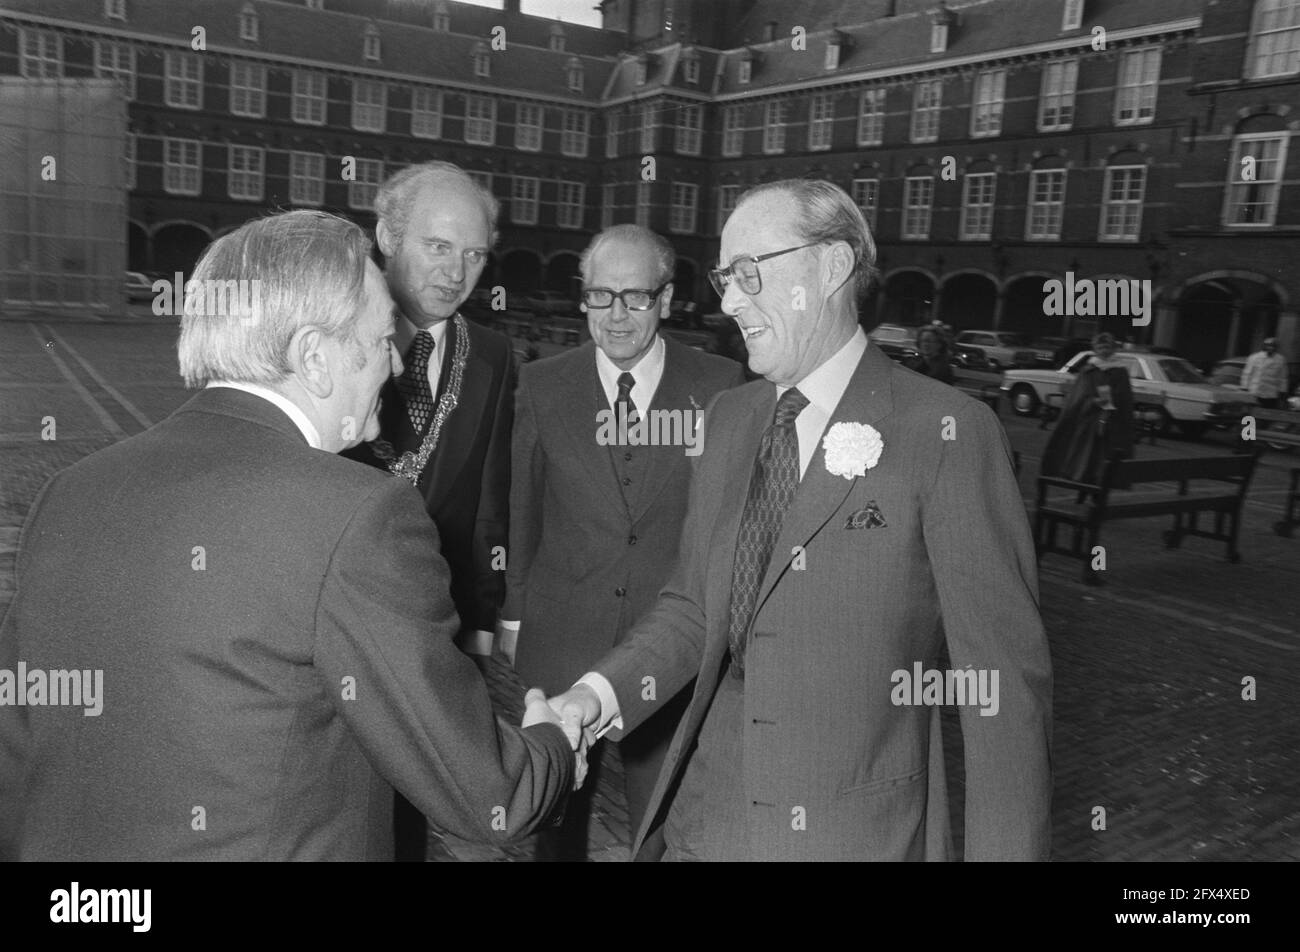 Prince Bernhard present at 50th anniversary of Foreign Press Association in Ridderzaal; Bernhard welcomed by chairman Herman Bleich, middle $, November 14, 1975, anniversaries, princes, presidents, The Netherlands, 20th century press agency photo, news to remember, documentary, historic photography 1945-1990, visual stories, human history of the Twentieth Century, capturing moments in time Stock Photo